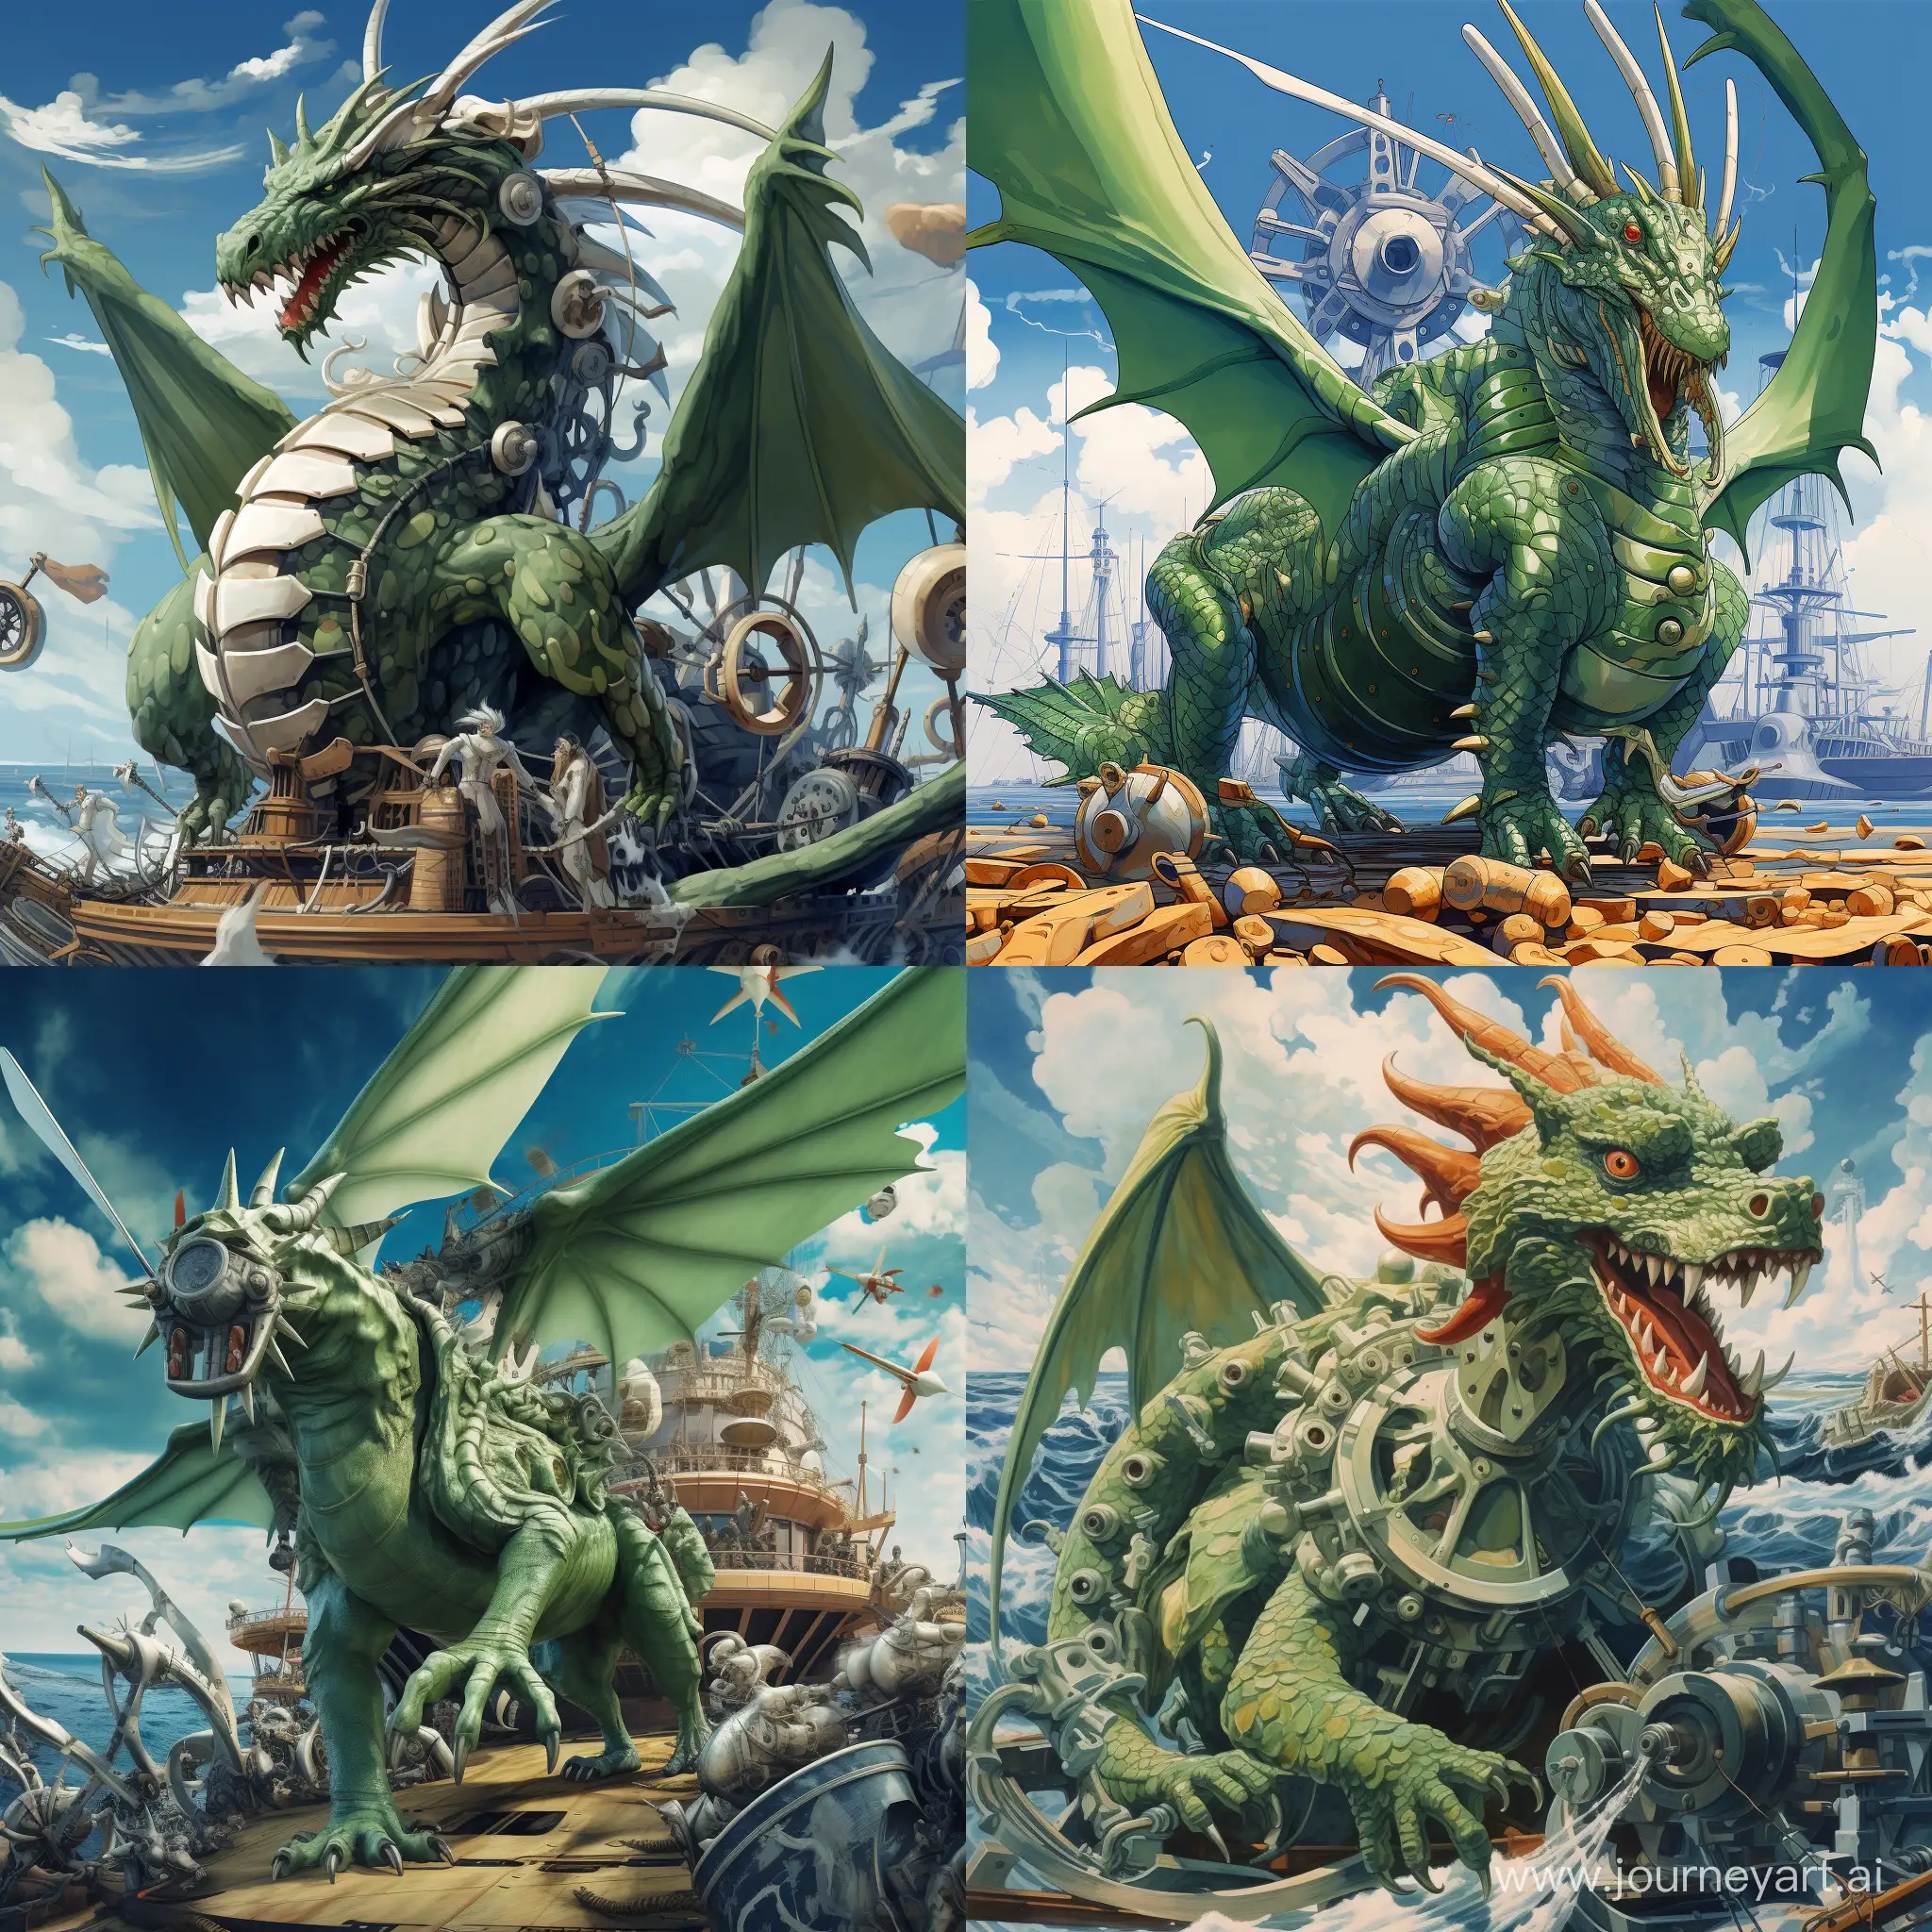 Majestic-Green-Dragon-Soars-Over-Military-Ship-with-Skilled-Mechanics